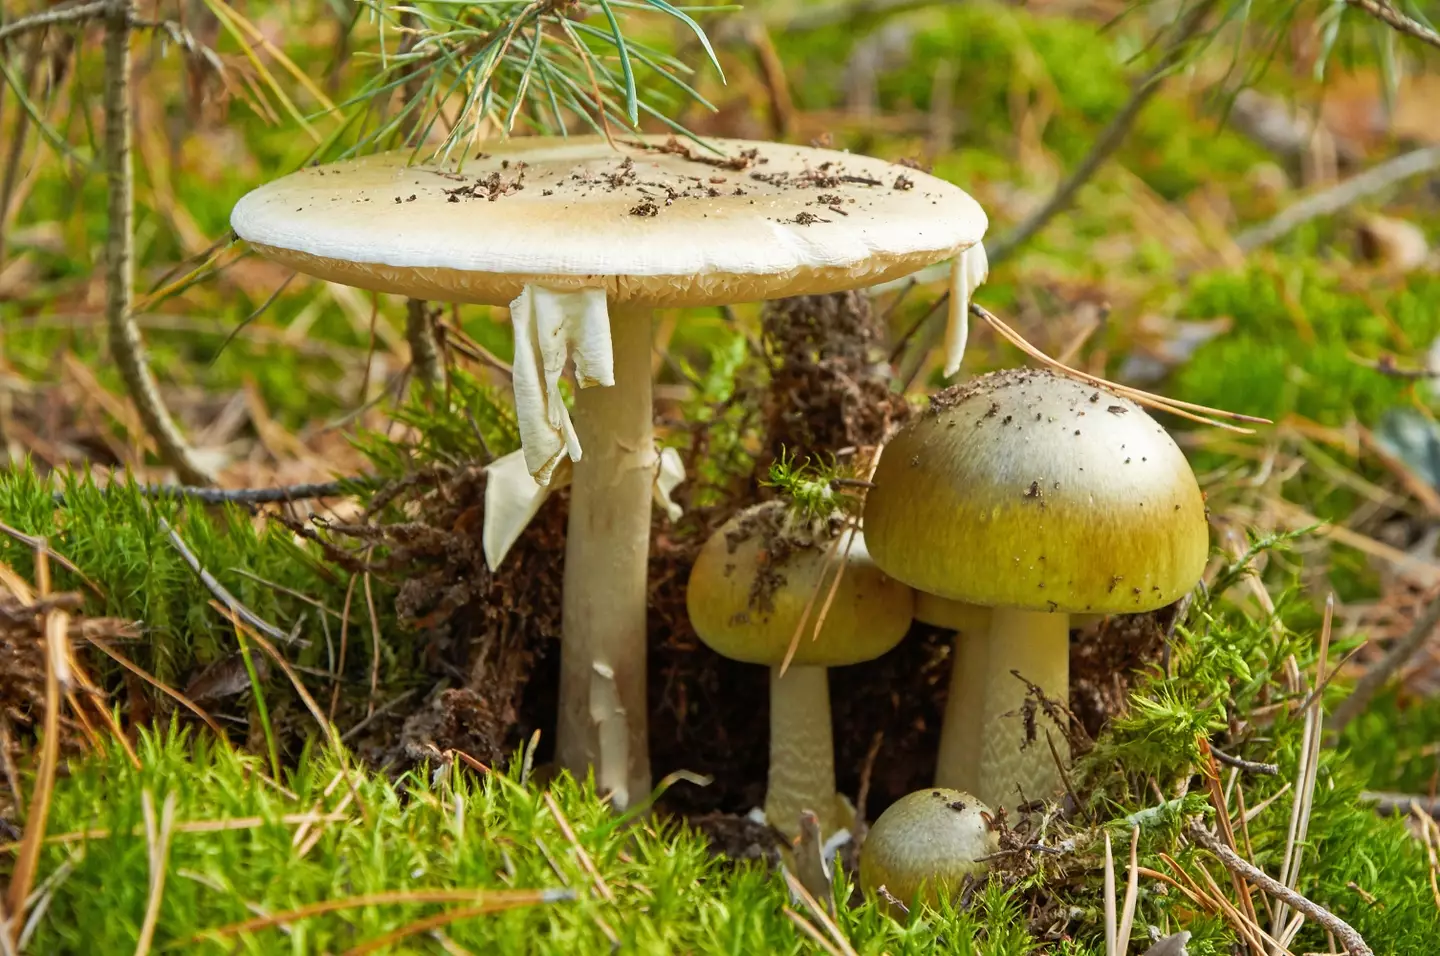 California is being invaded by the world's deadliest mushroom.